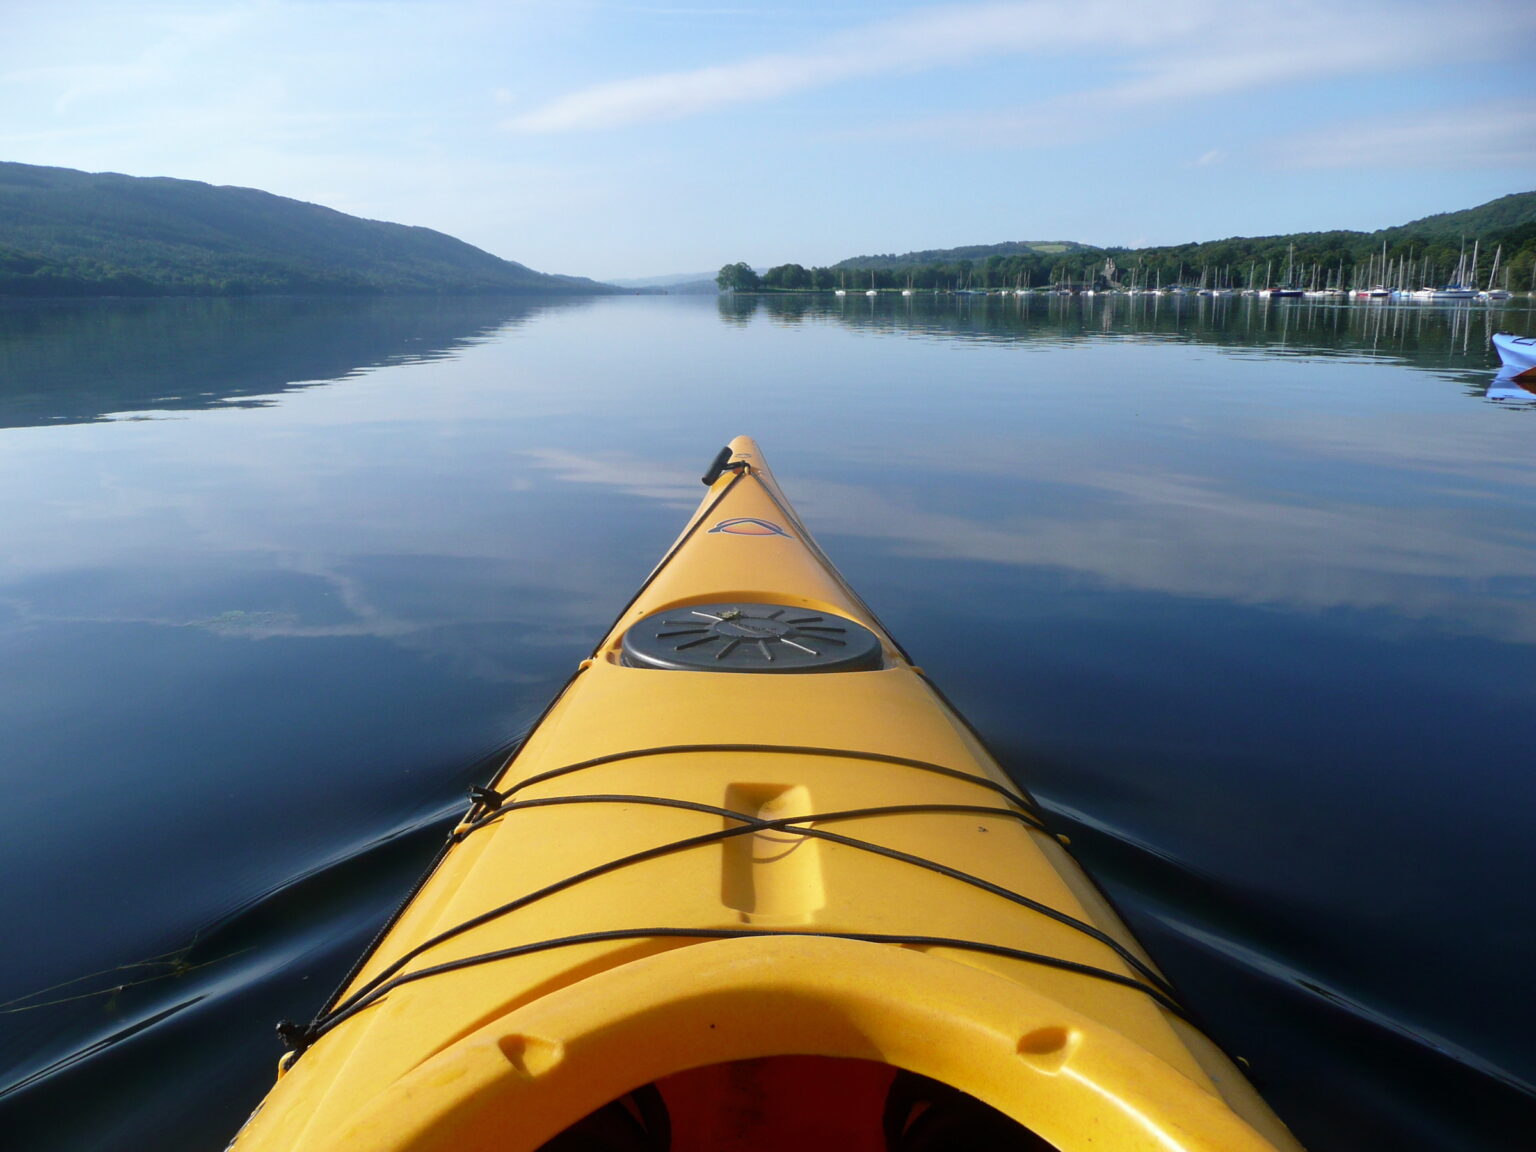 Kayaking and canoeing are popular water sports that offer a great way to explore the outdoors and get some exercise. Here's how.